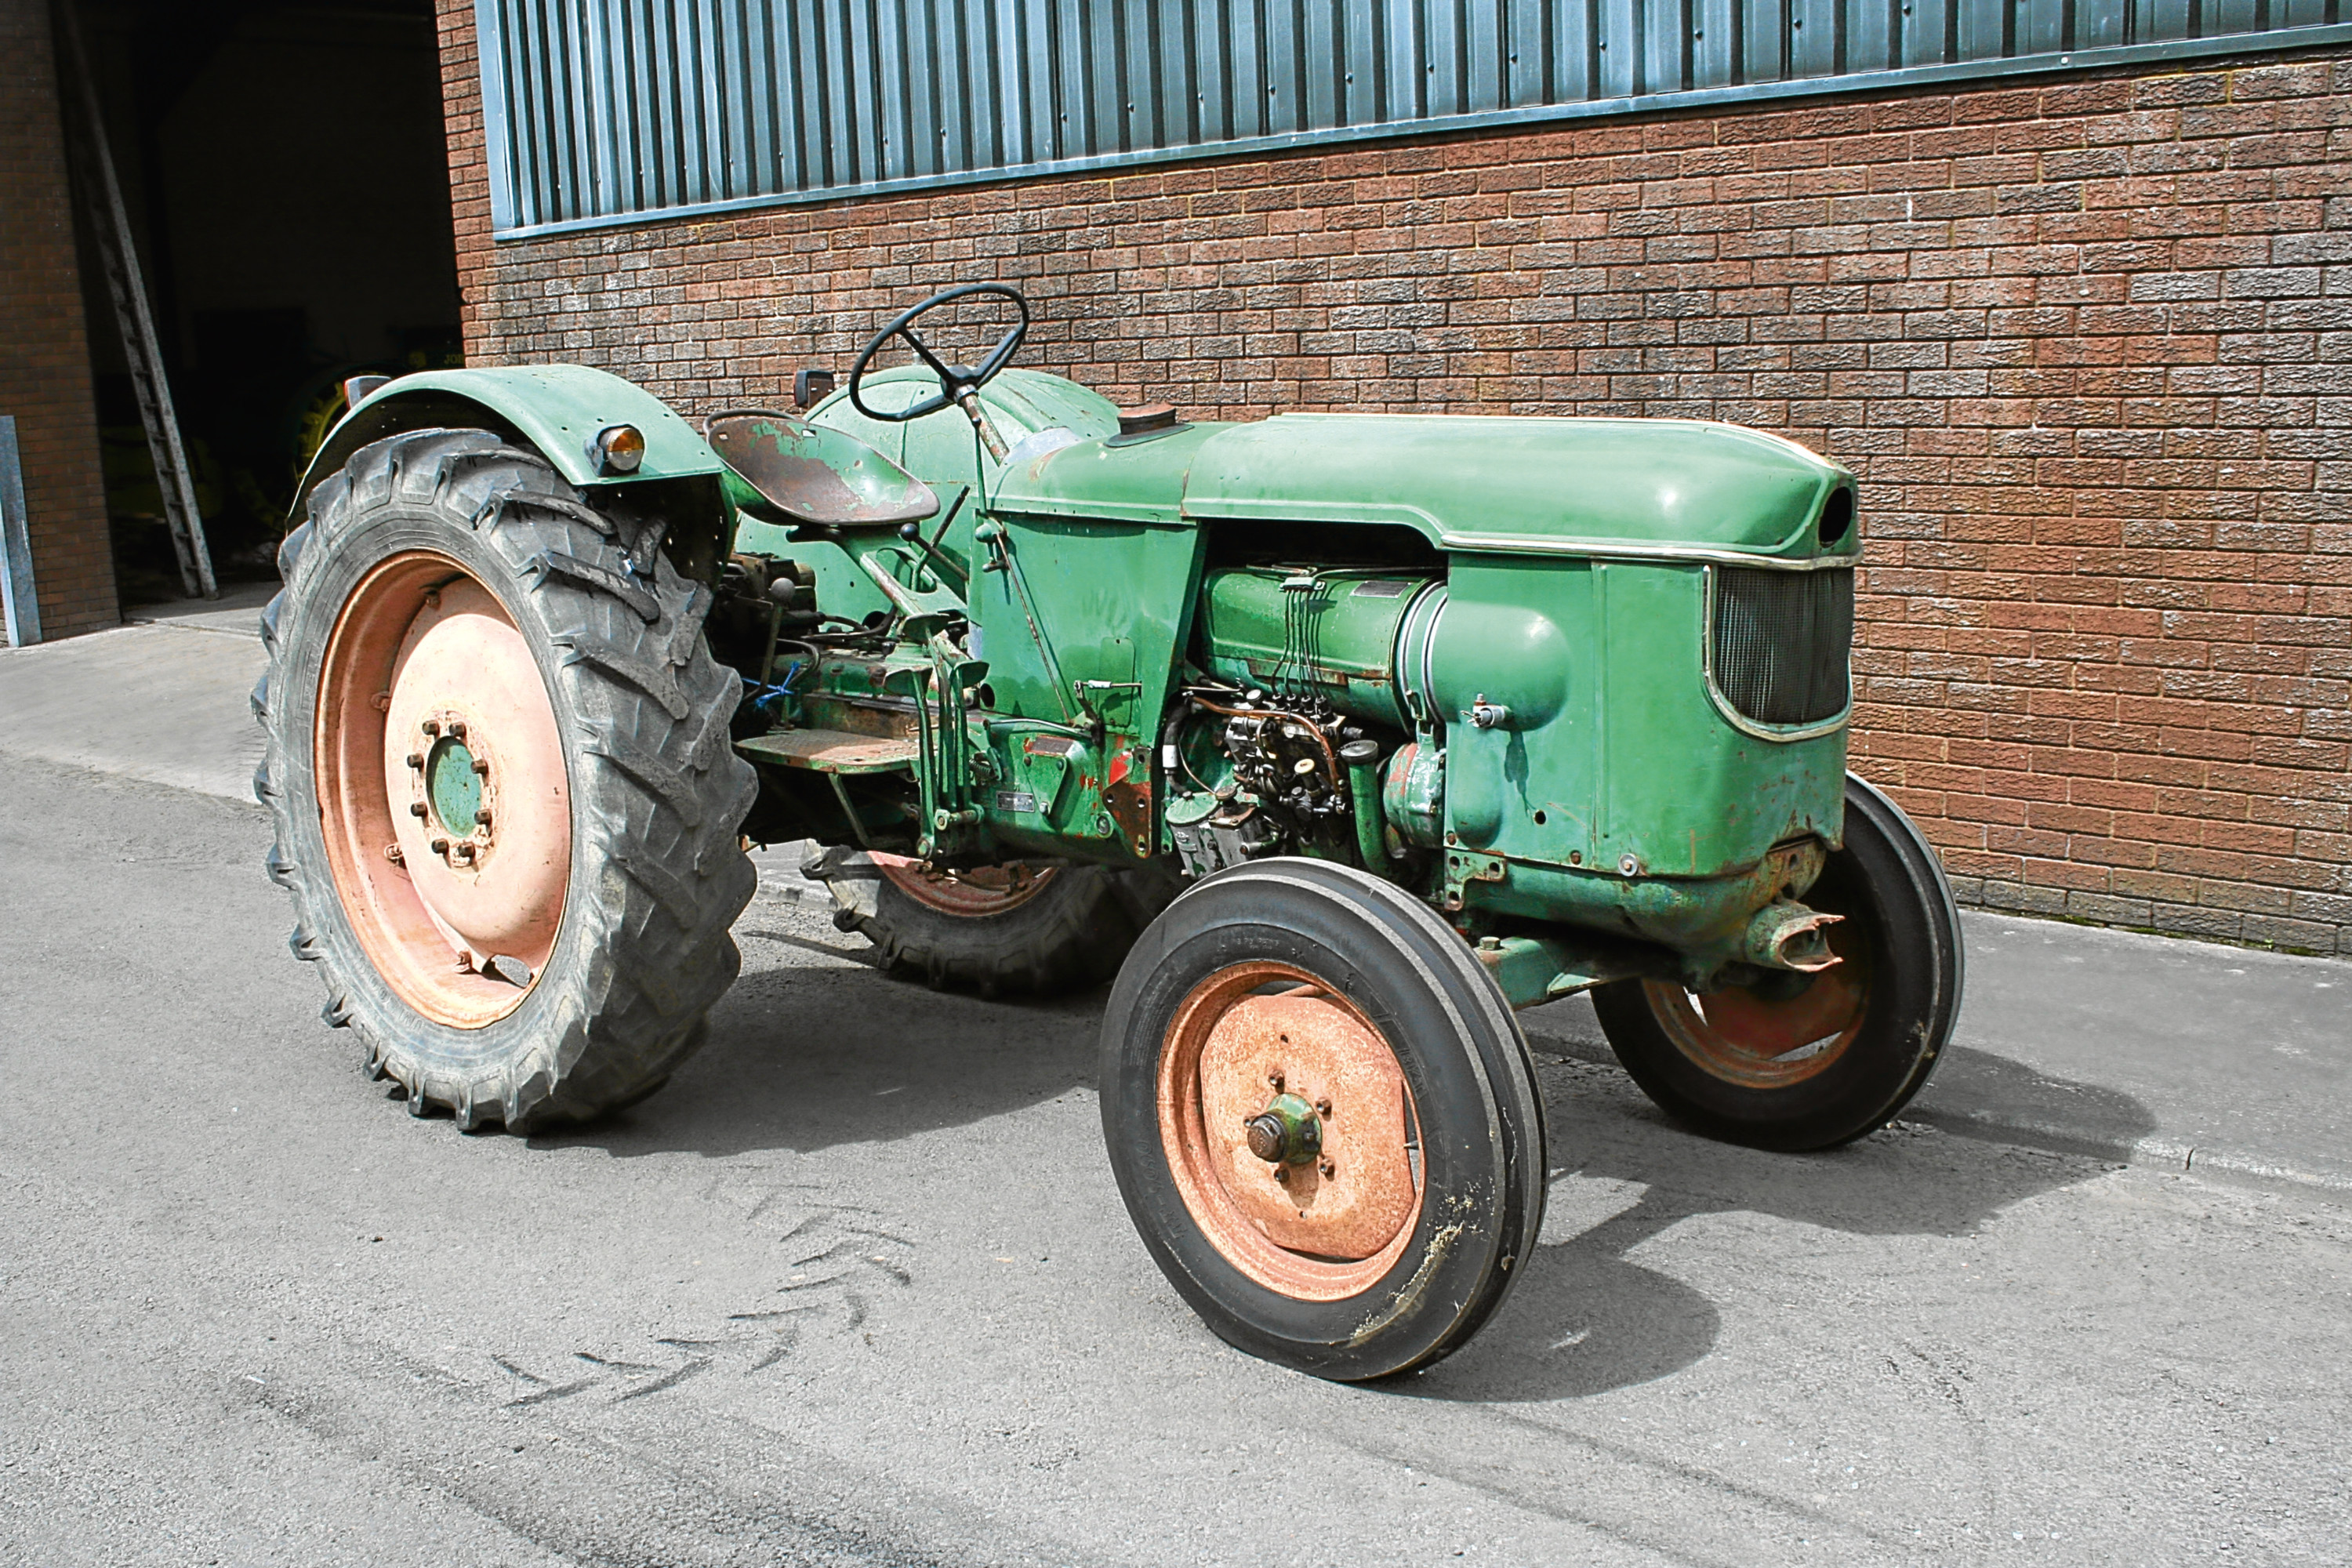 A Deutz D50 tractor from before the time they were available in the UK fitted with the air cooled engines Deutz became famous for.